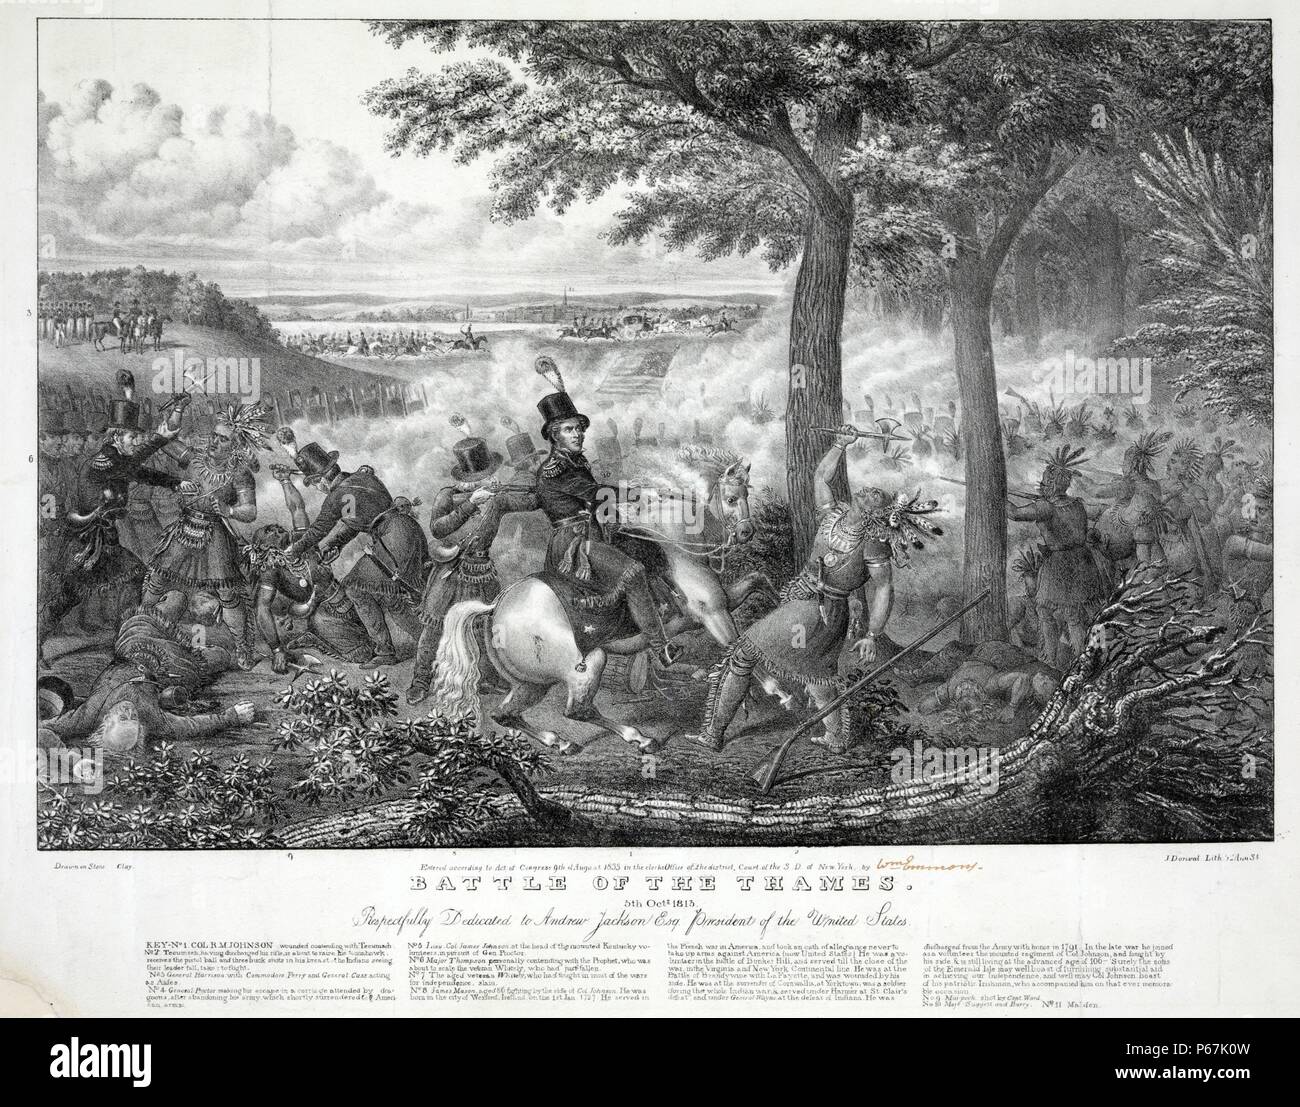 American forces fighting Tecumseh's Indian confederation. In the center Col. R. M. Johnson shoots Tecumseh who has raised his tomahawk. A legend at the bottom describes the men pictured and describes of their role in the battle. Stock Photo